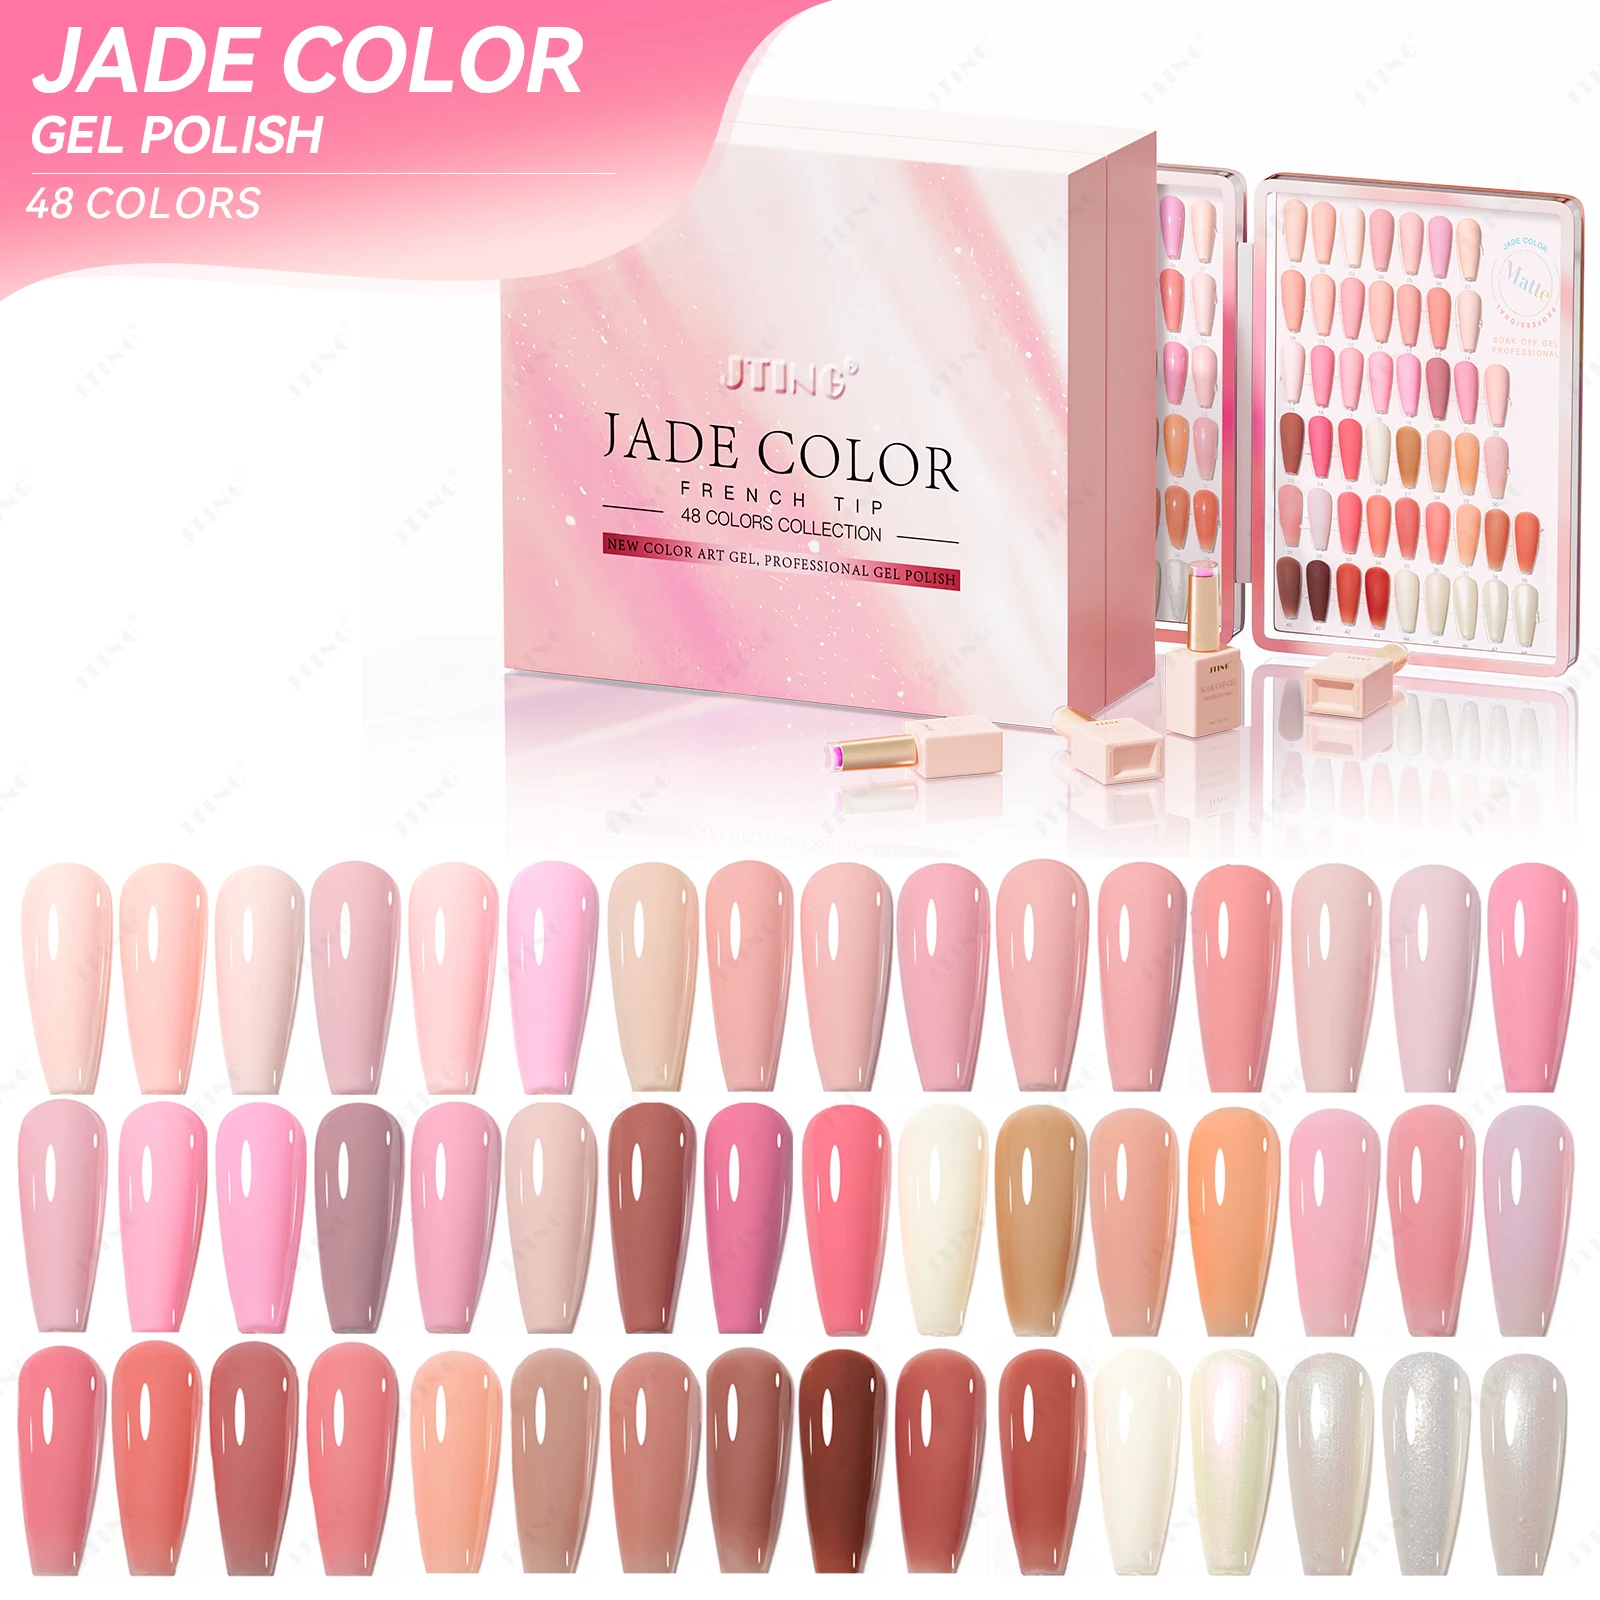 

JTING Popular Trending 48colors pink gel polish collection Cruety free jade colors gel nail polish with free color book box